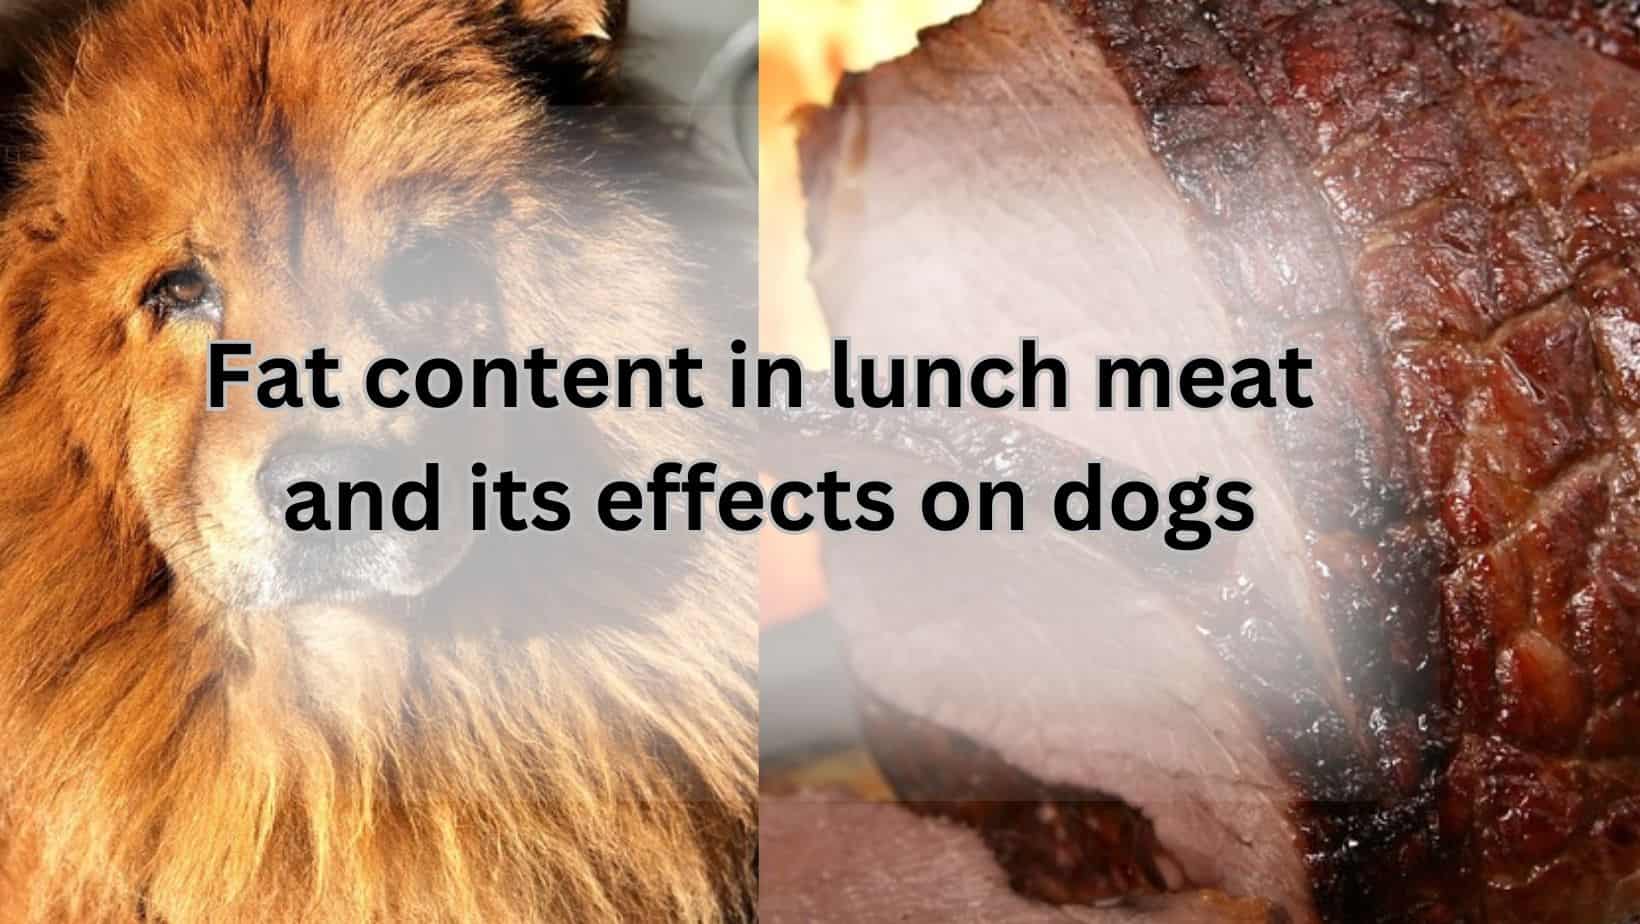 Fat content in lunch meat and its effects on dogs